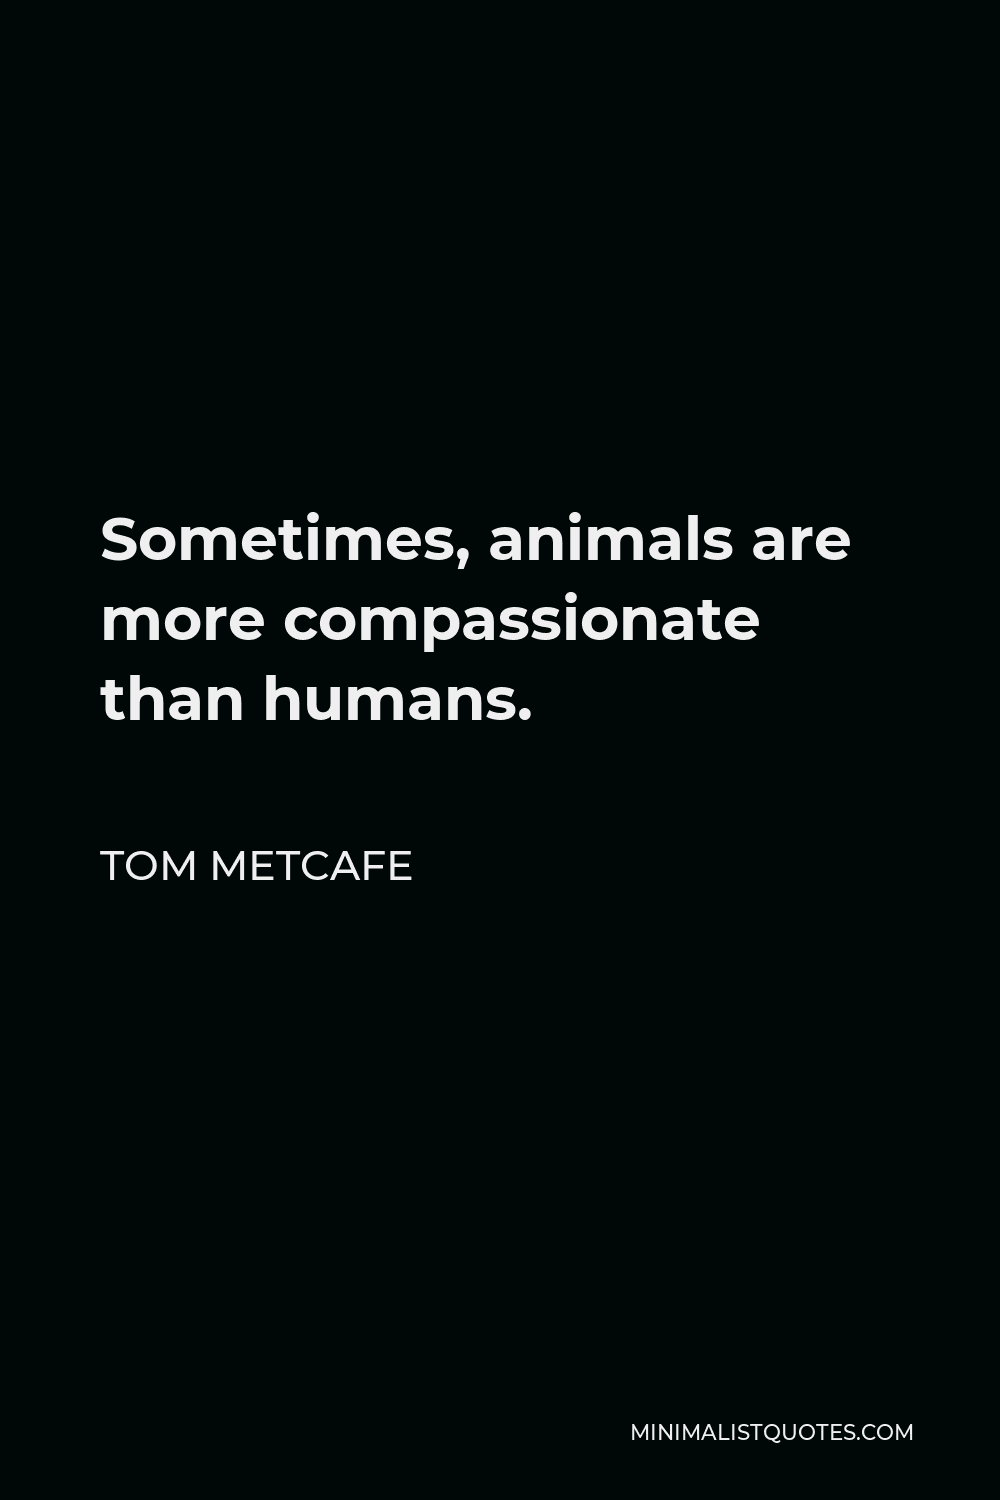 Tom Metcafe Quote - Sometimes, animals are more compassionate than humans.